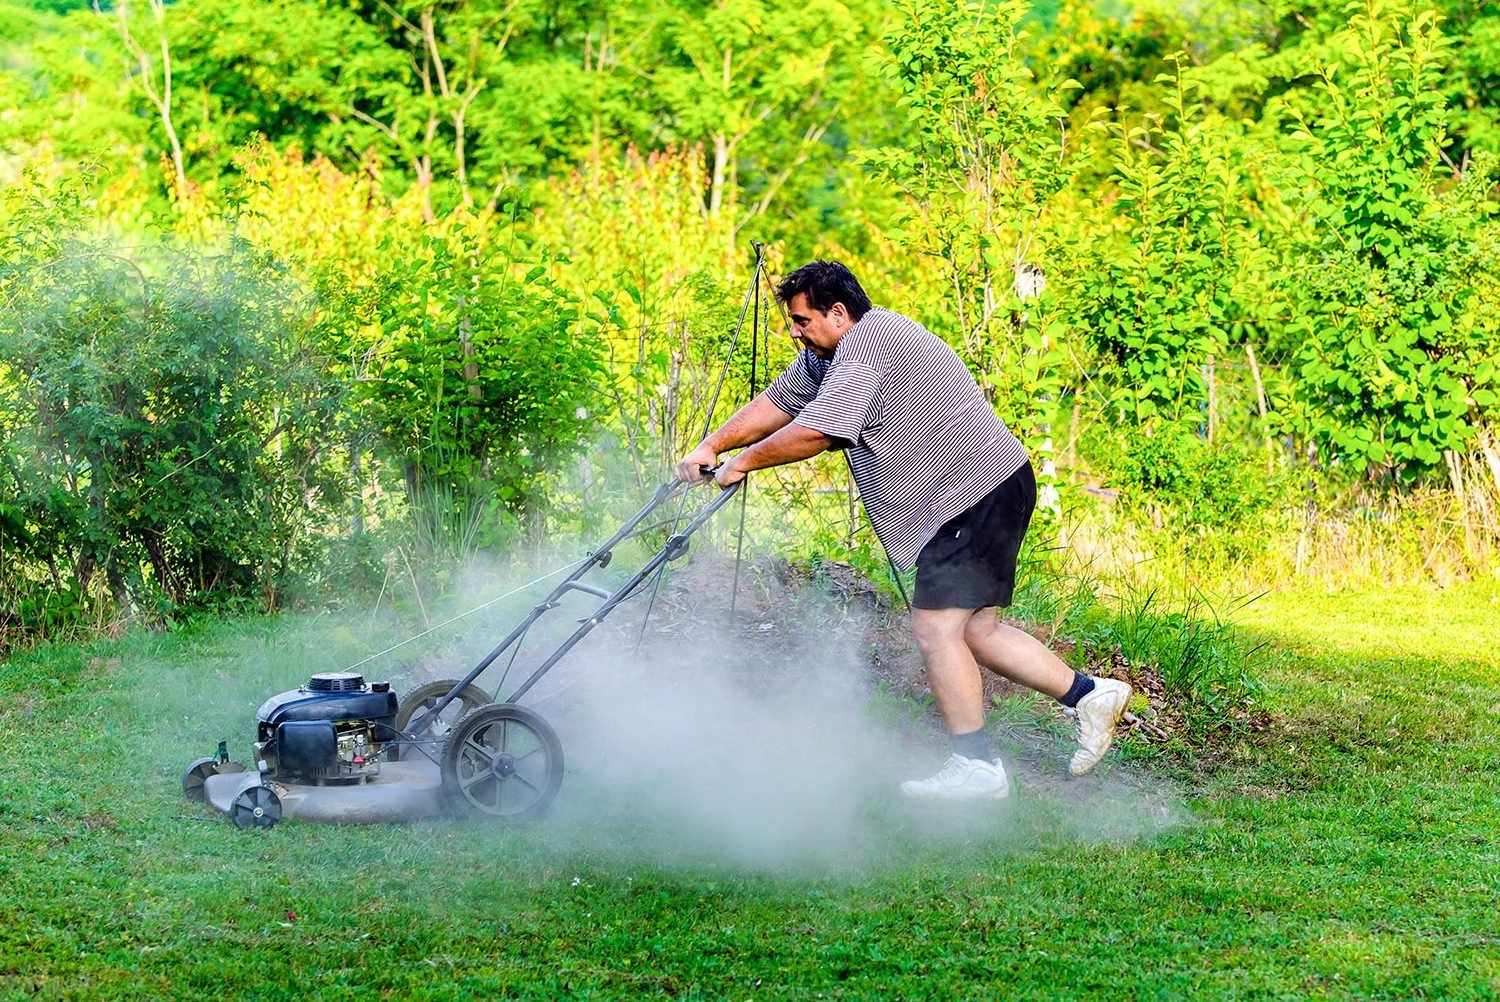 Why Is My Lawnmower Smoking?